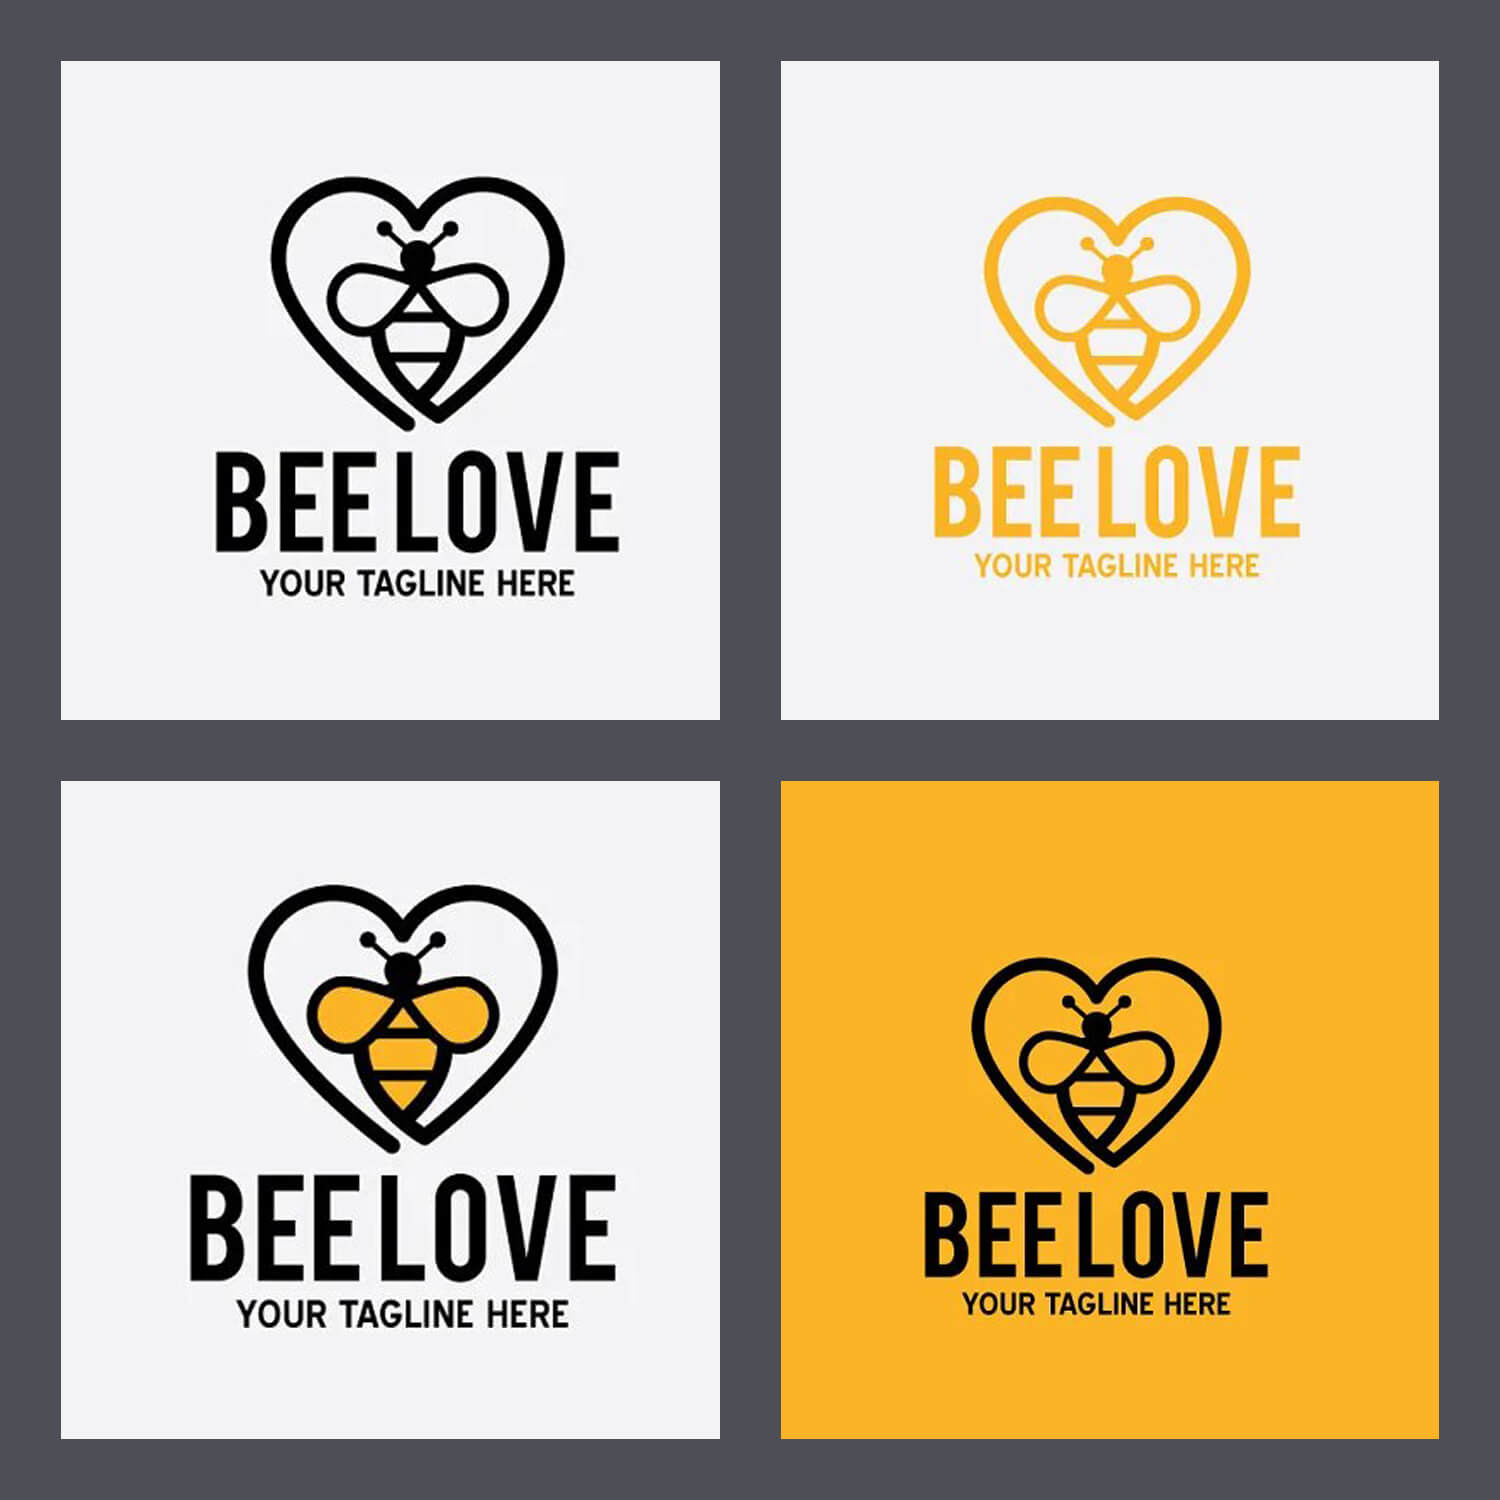 Four images of Beelove logos on a gray background.